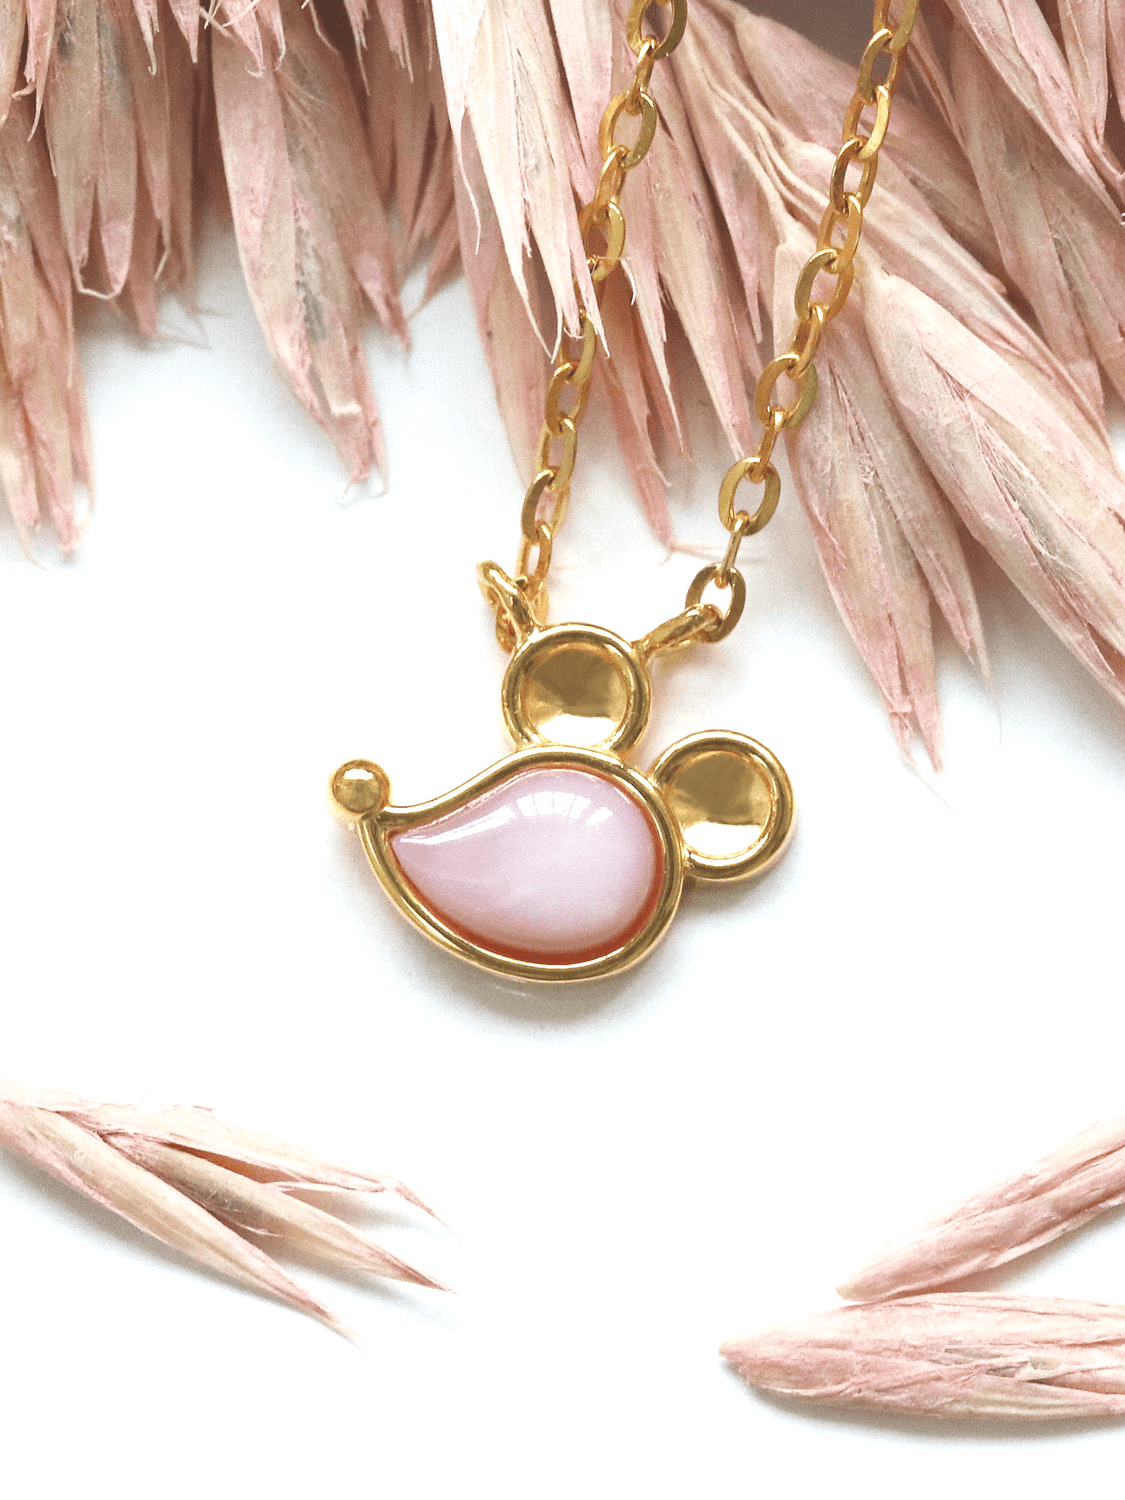 Prismatic Rat Necklace in Pink